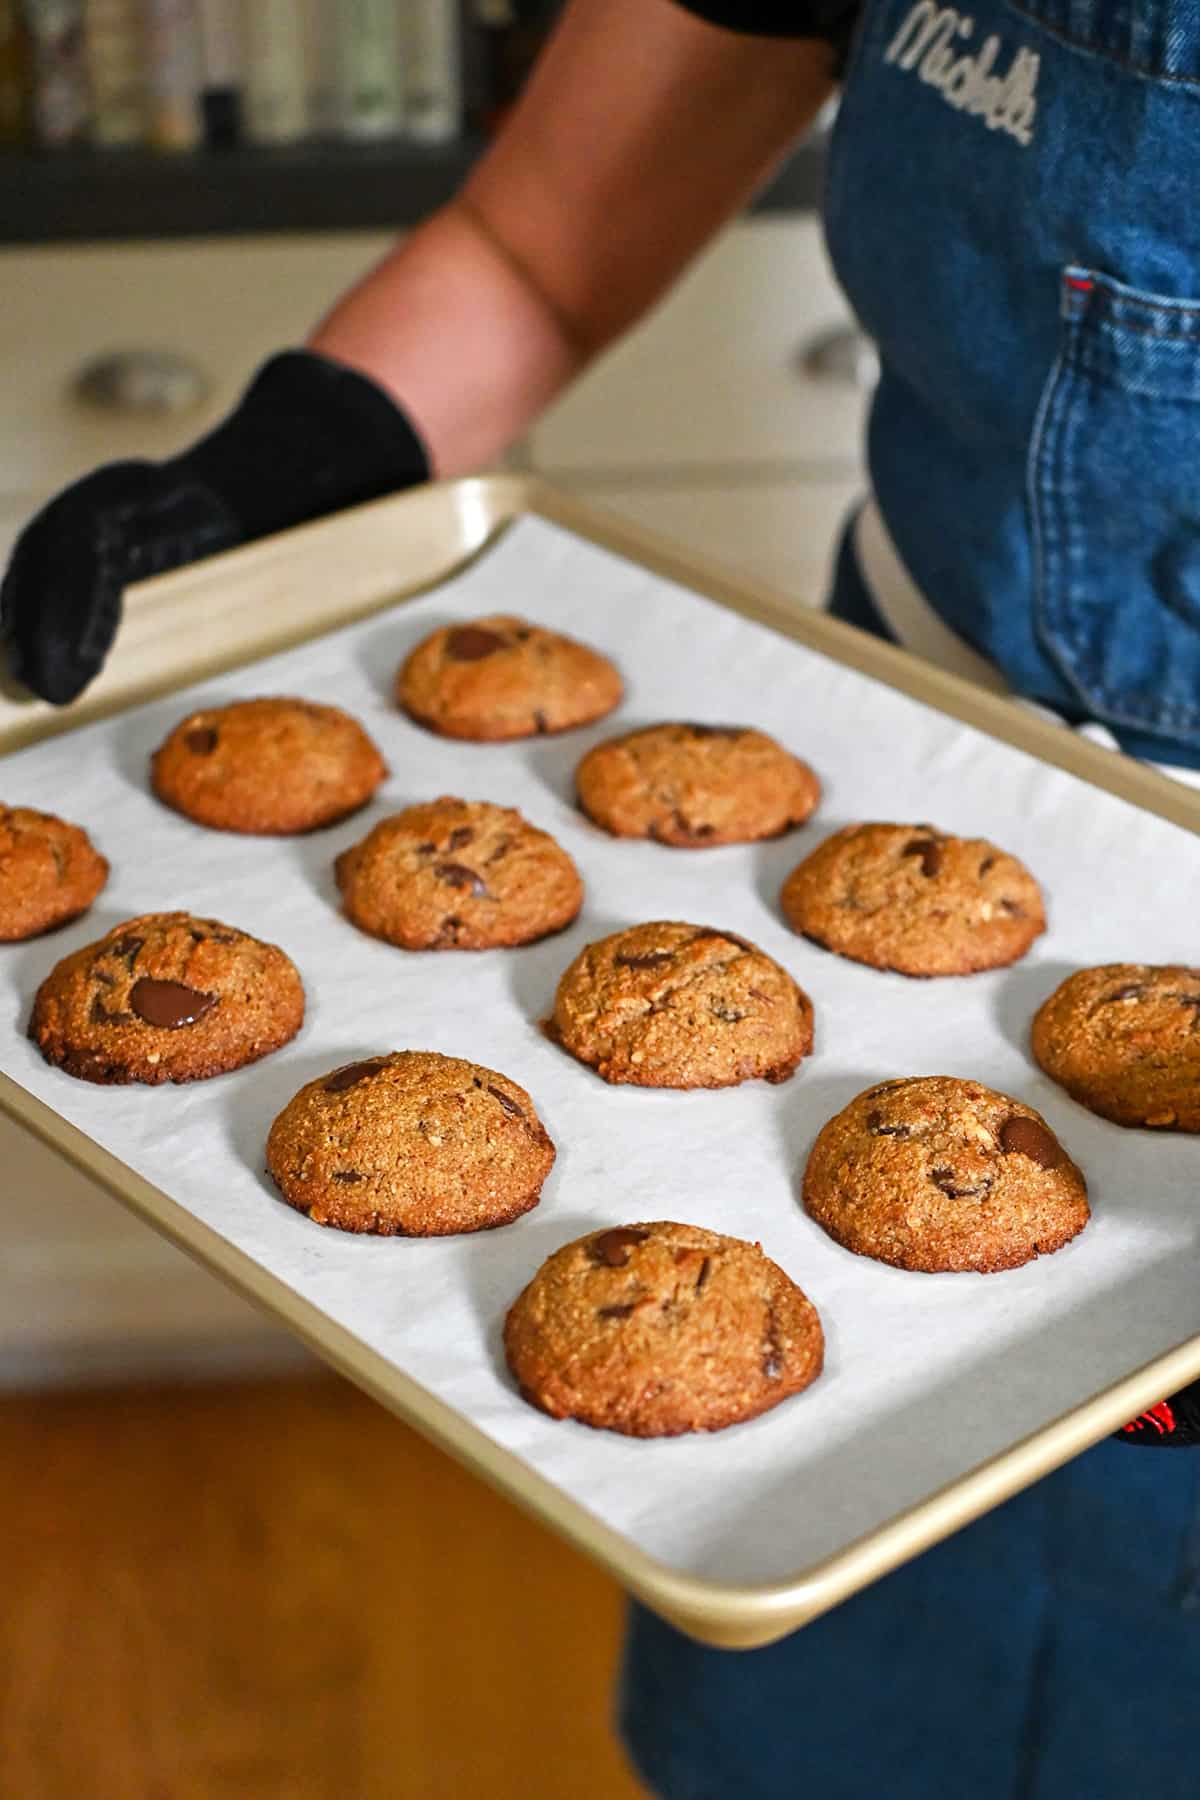 A person holds a tray of freshly baked paleo banana chocolate chip cookies.